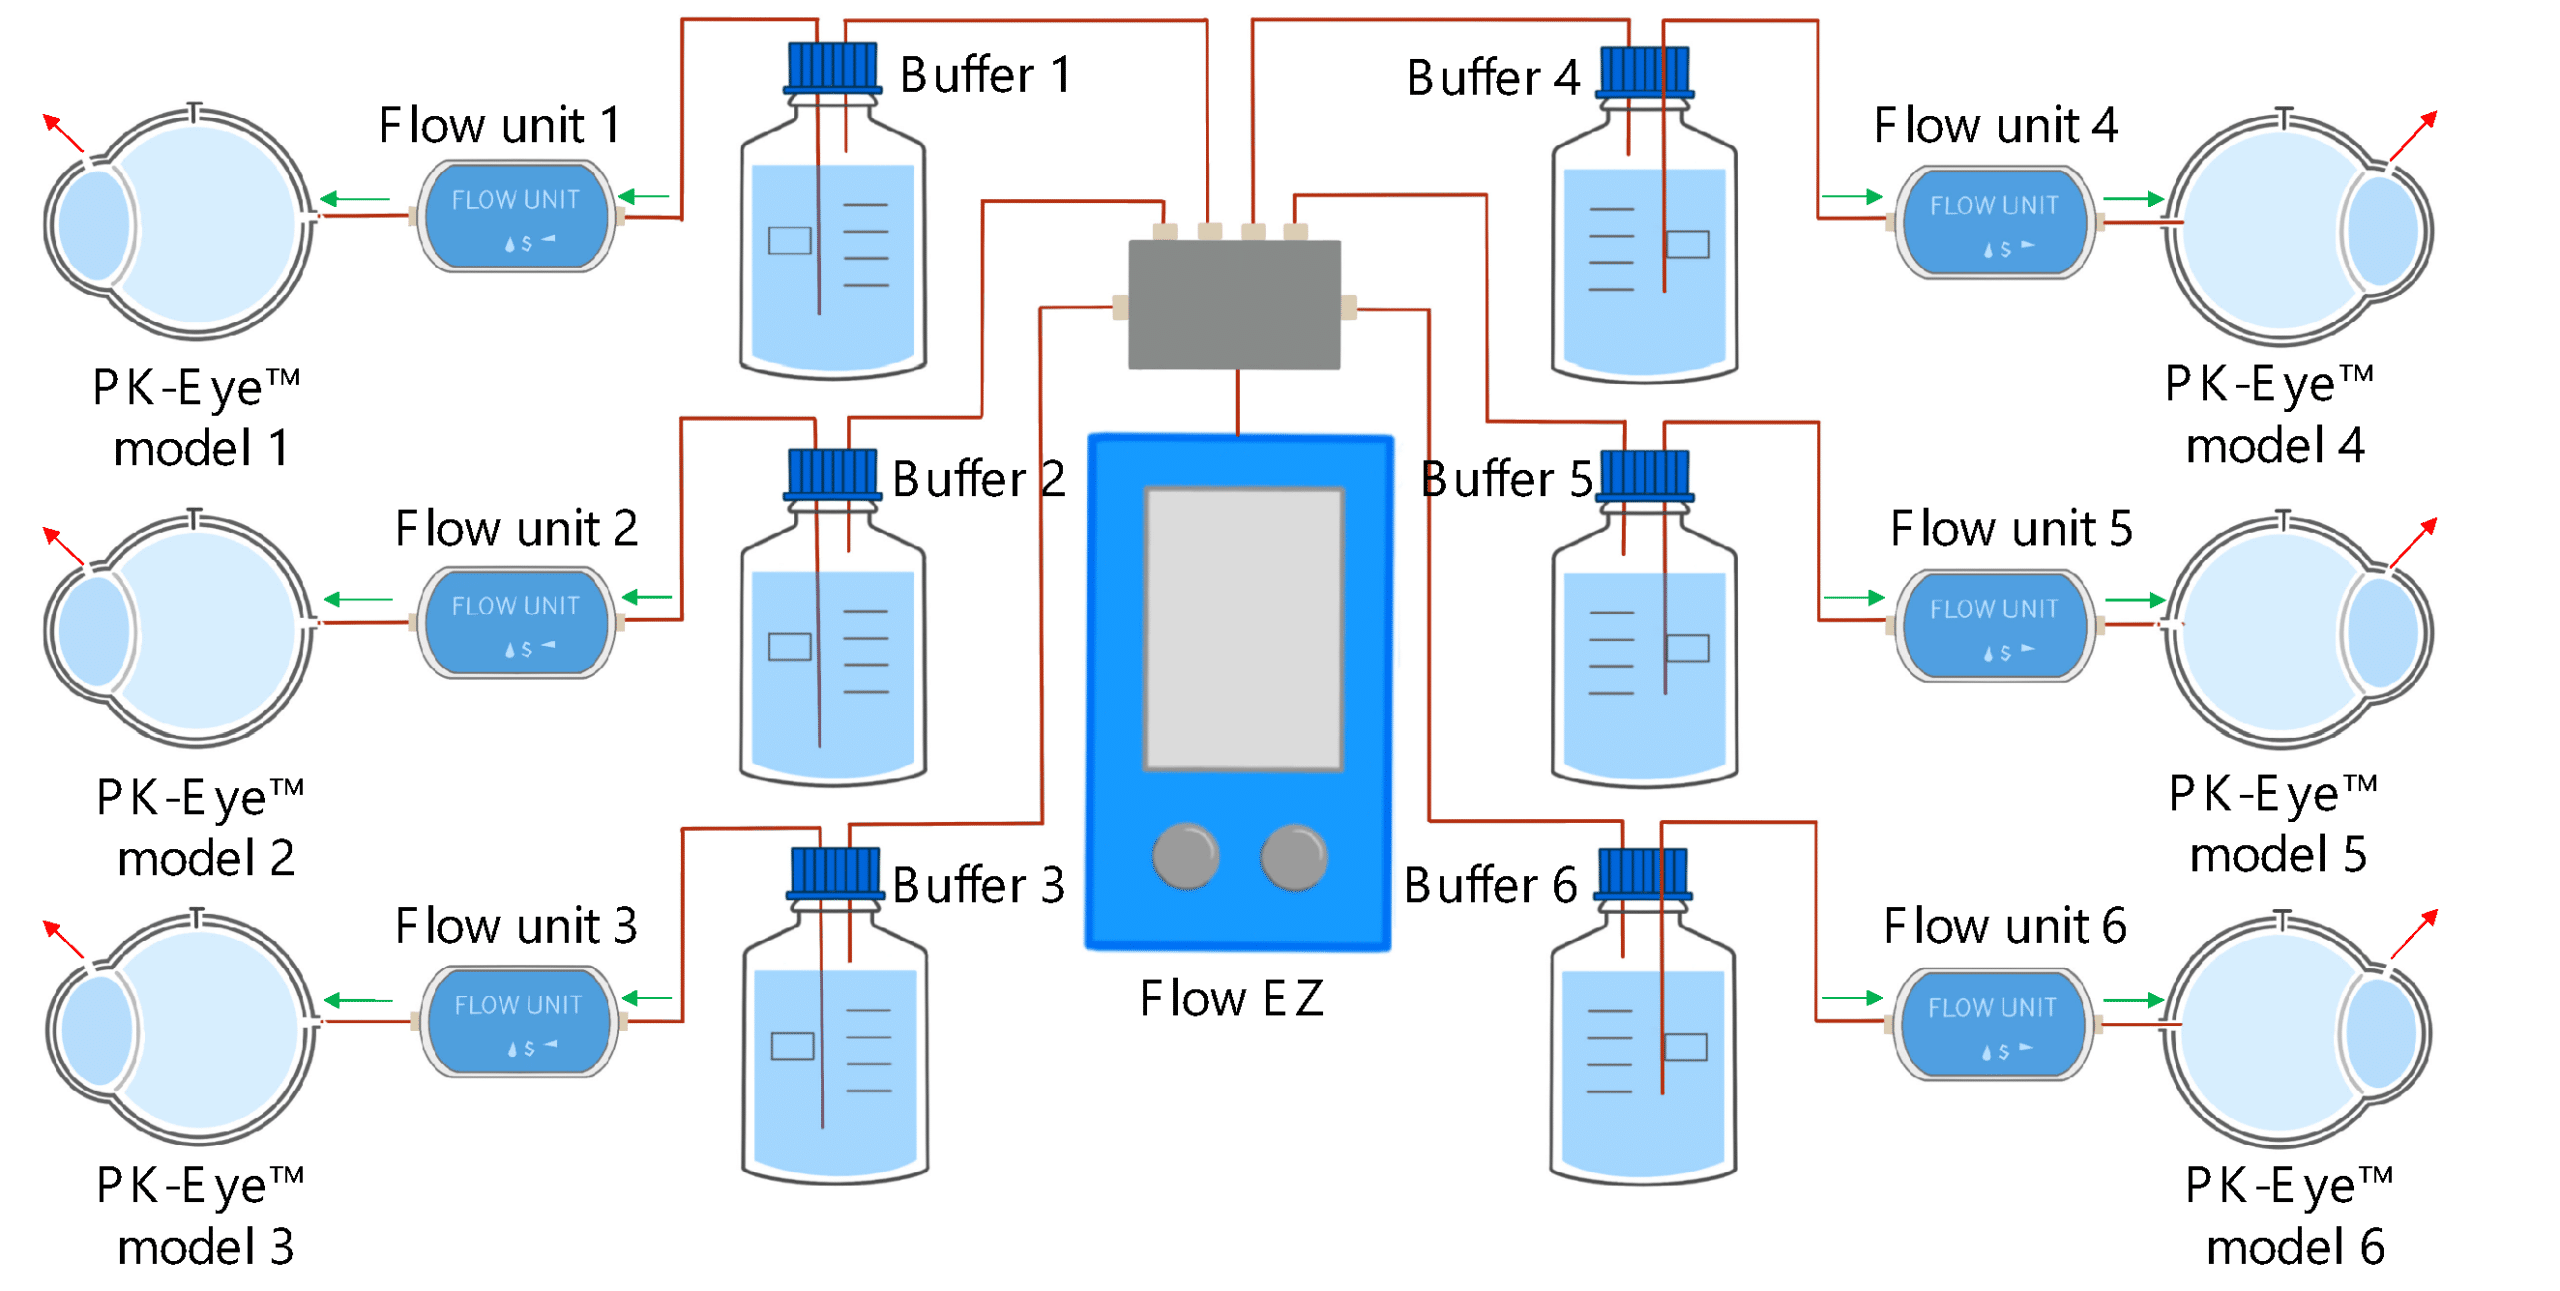 Experimental setup of flow rate control